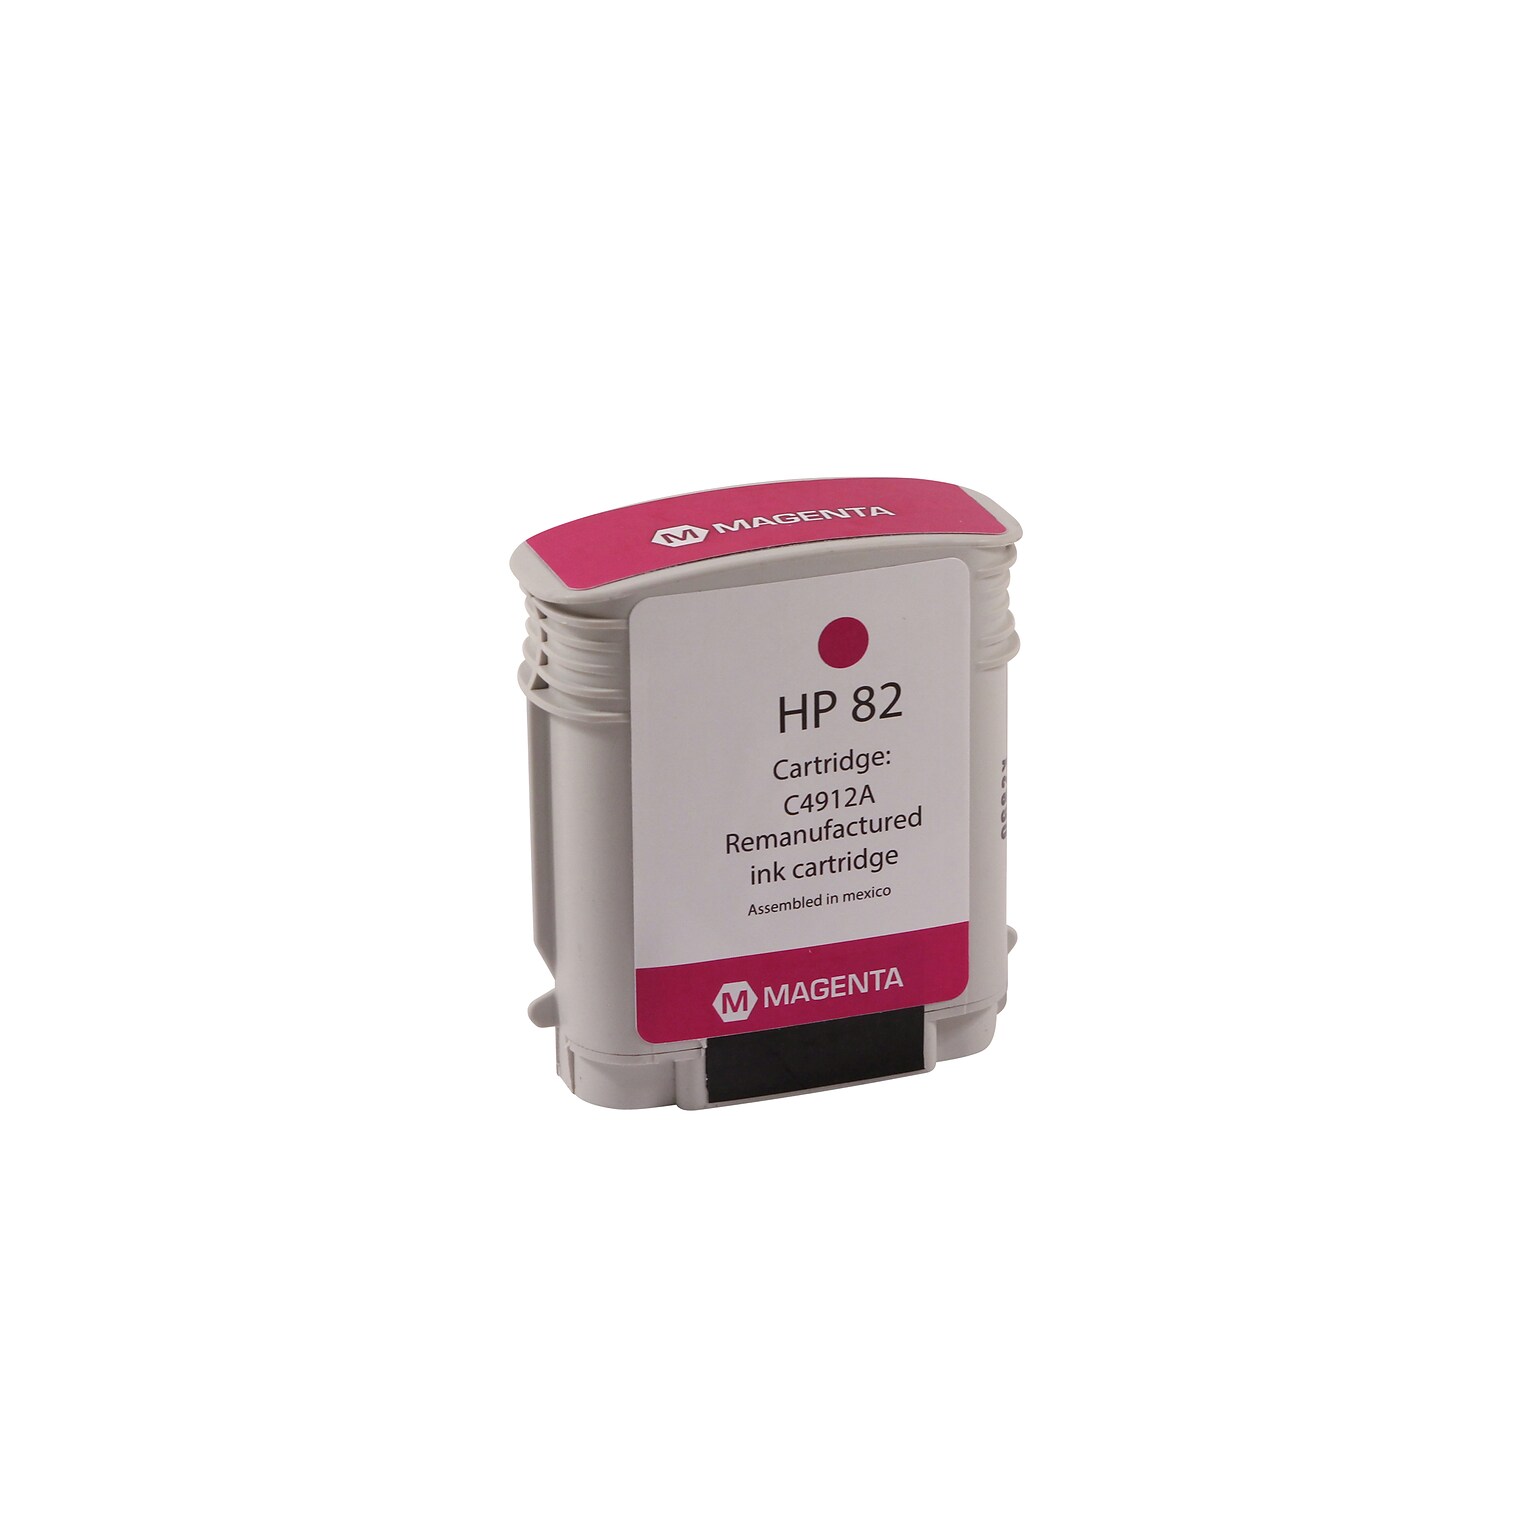 Clover Imaging Group Remanufactured Magenta High Yield Wide Format Inkjet Cartridge Replacement for HP 82 (C4912A)